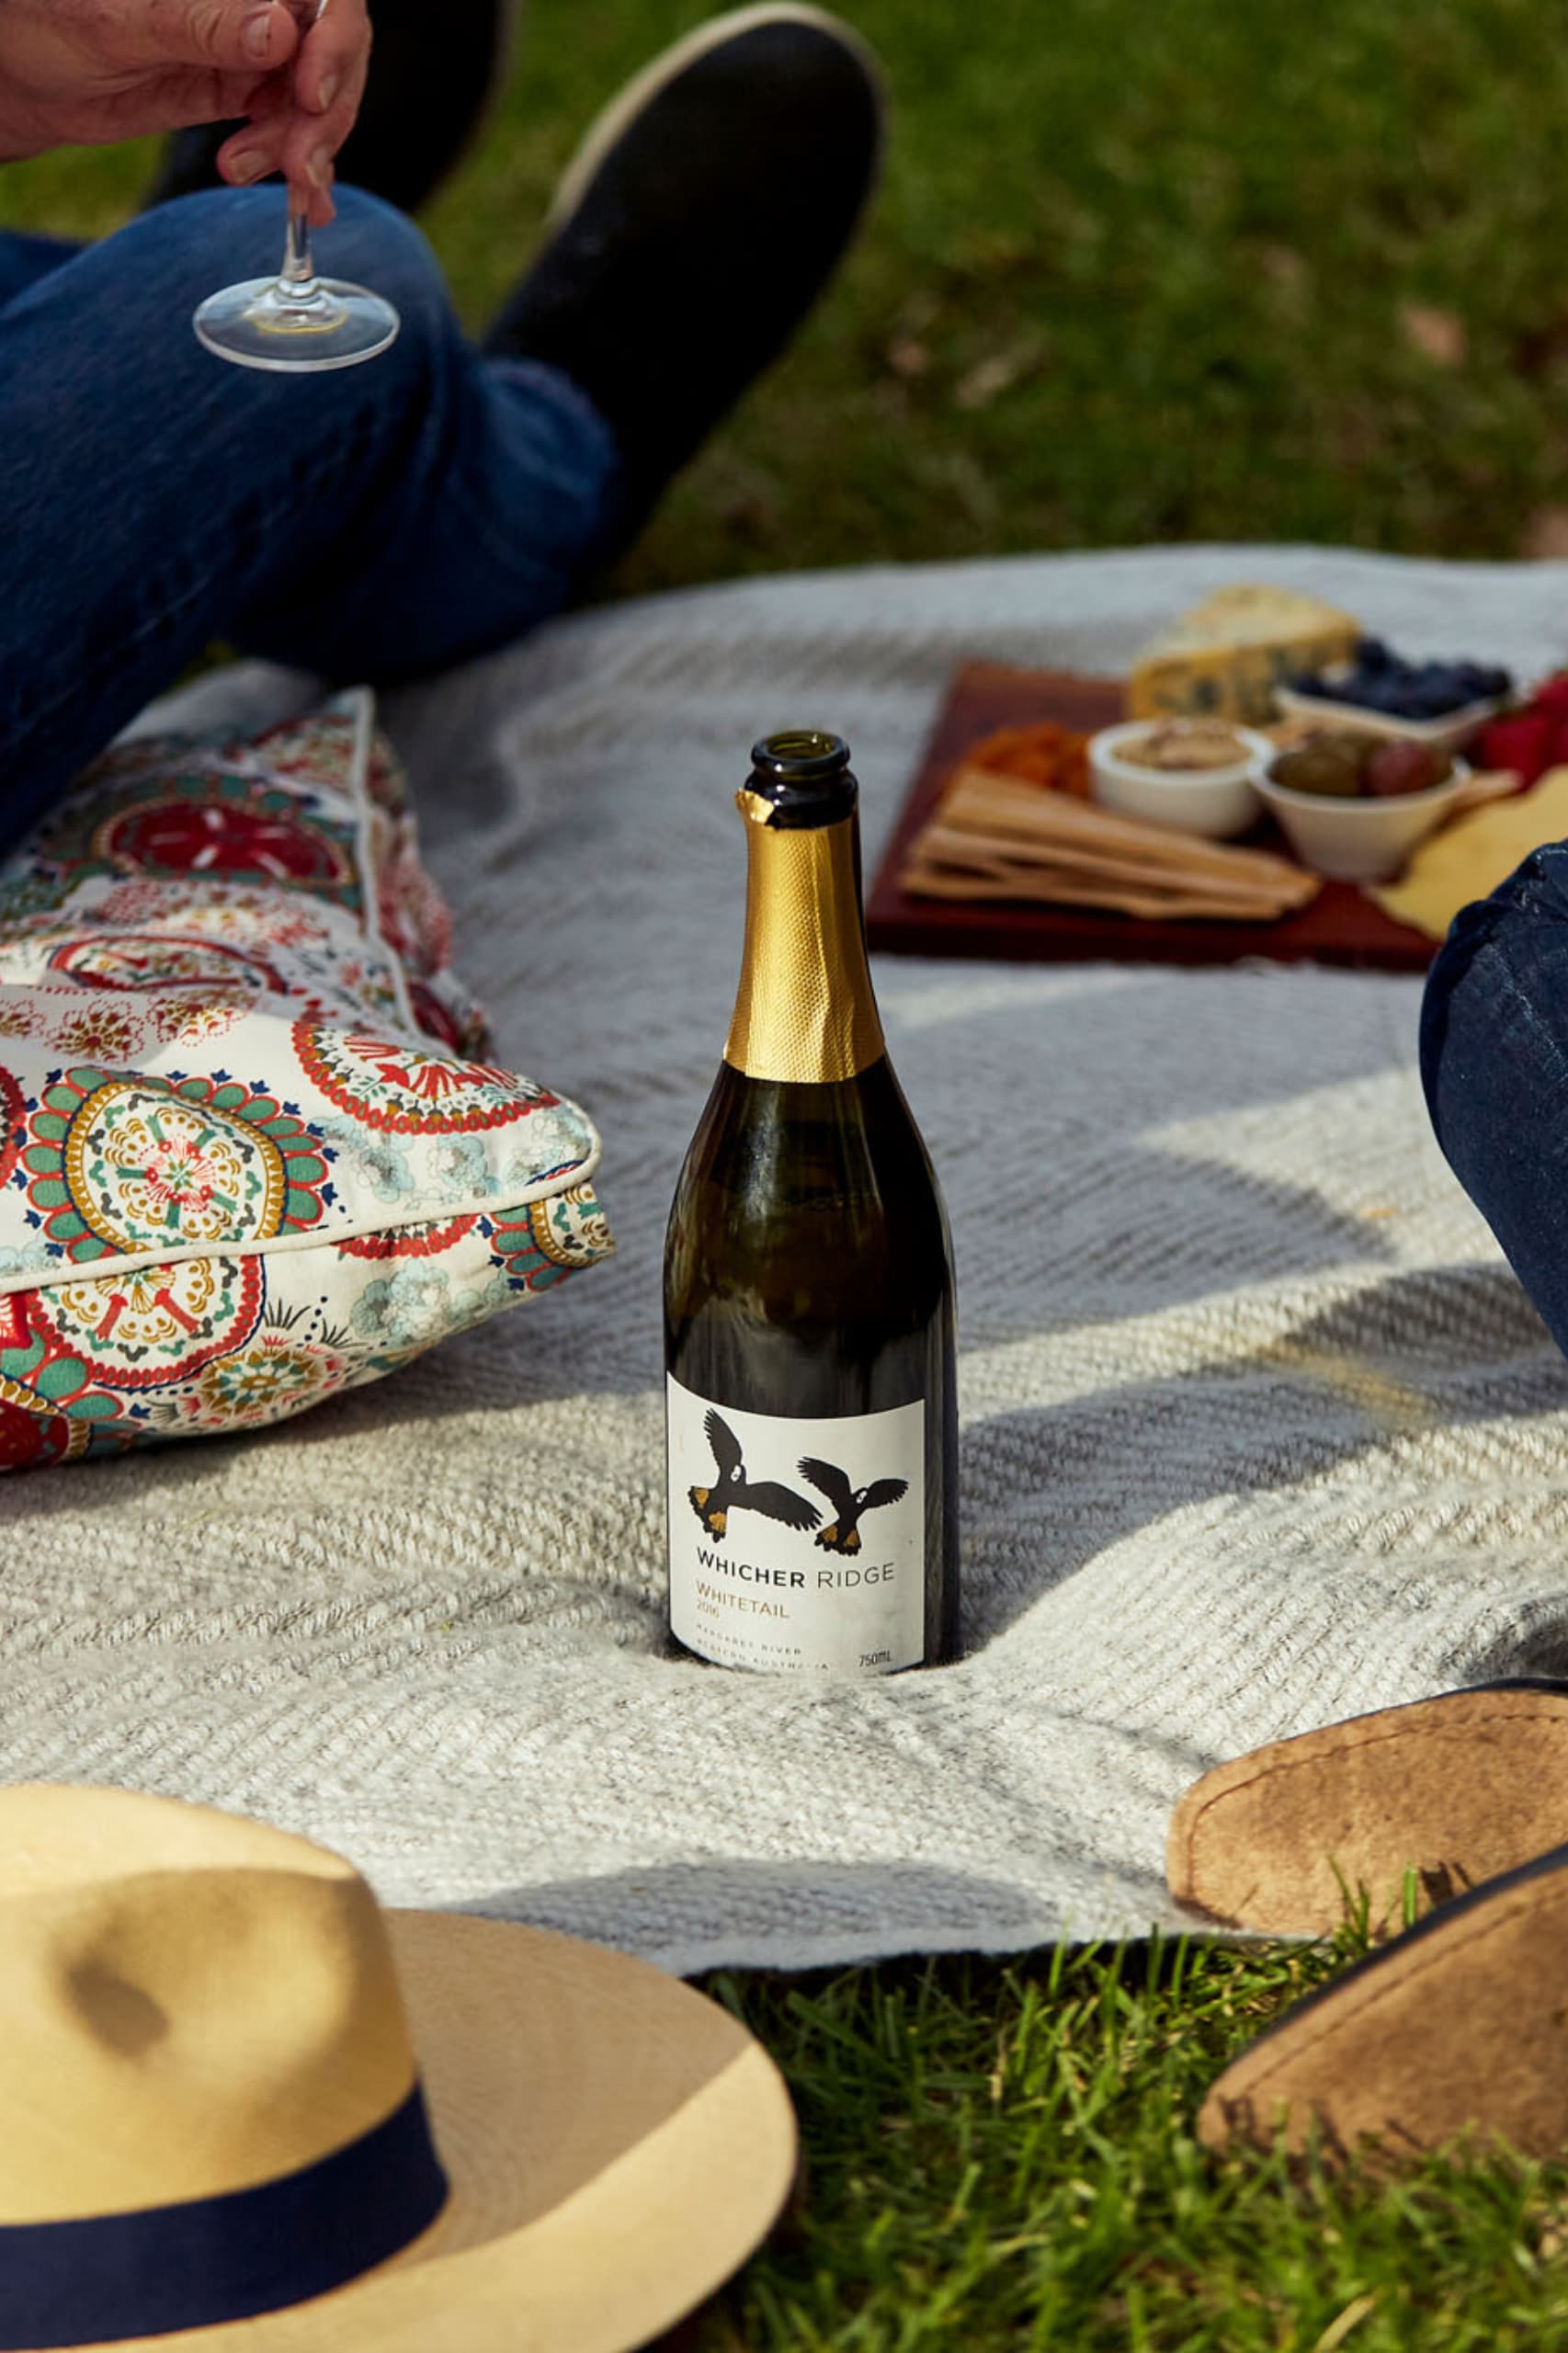 A bottle of Whicher Ridge wine resting on a picnic rug